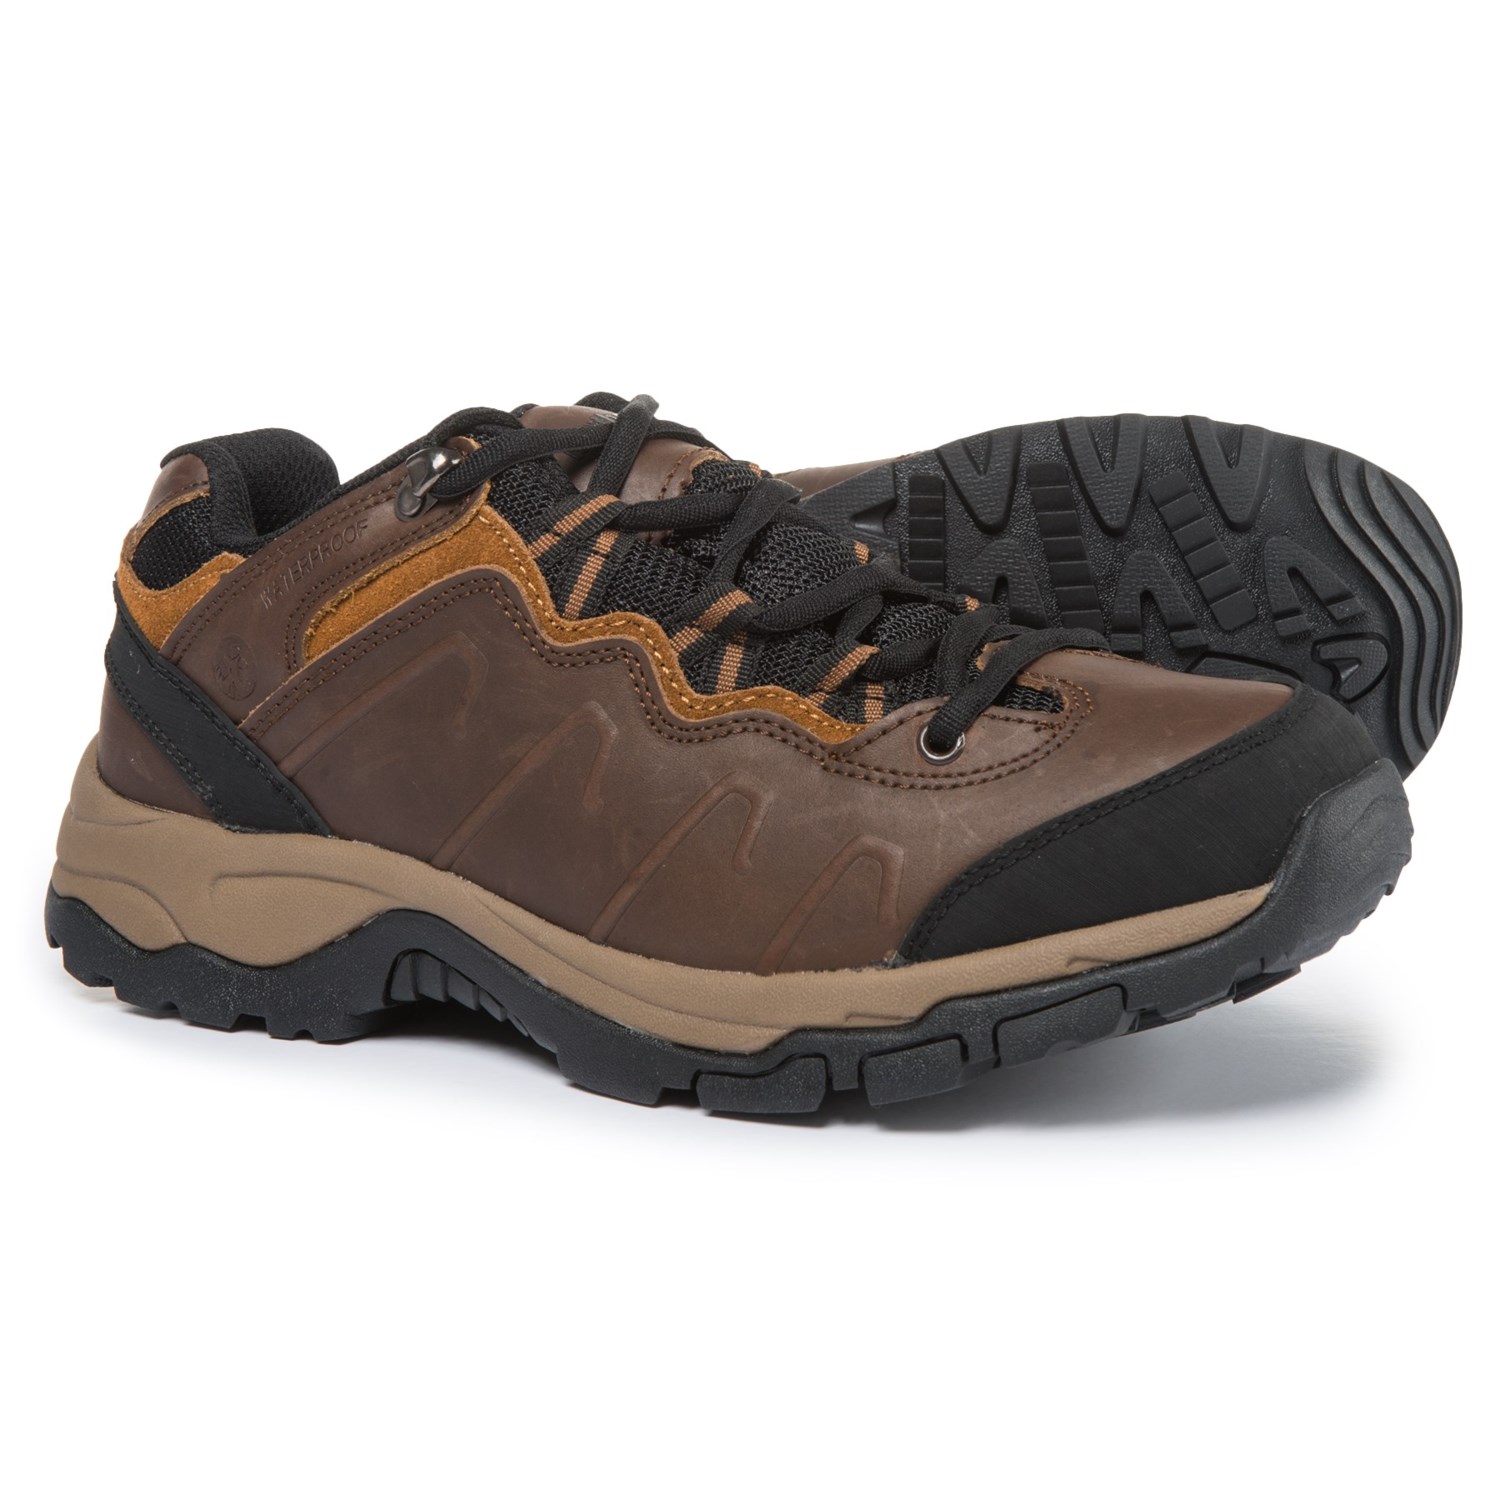 Northside Talus Leather Hiking Shoes – Waterproof (For Men)